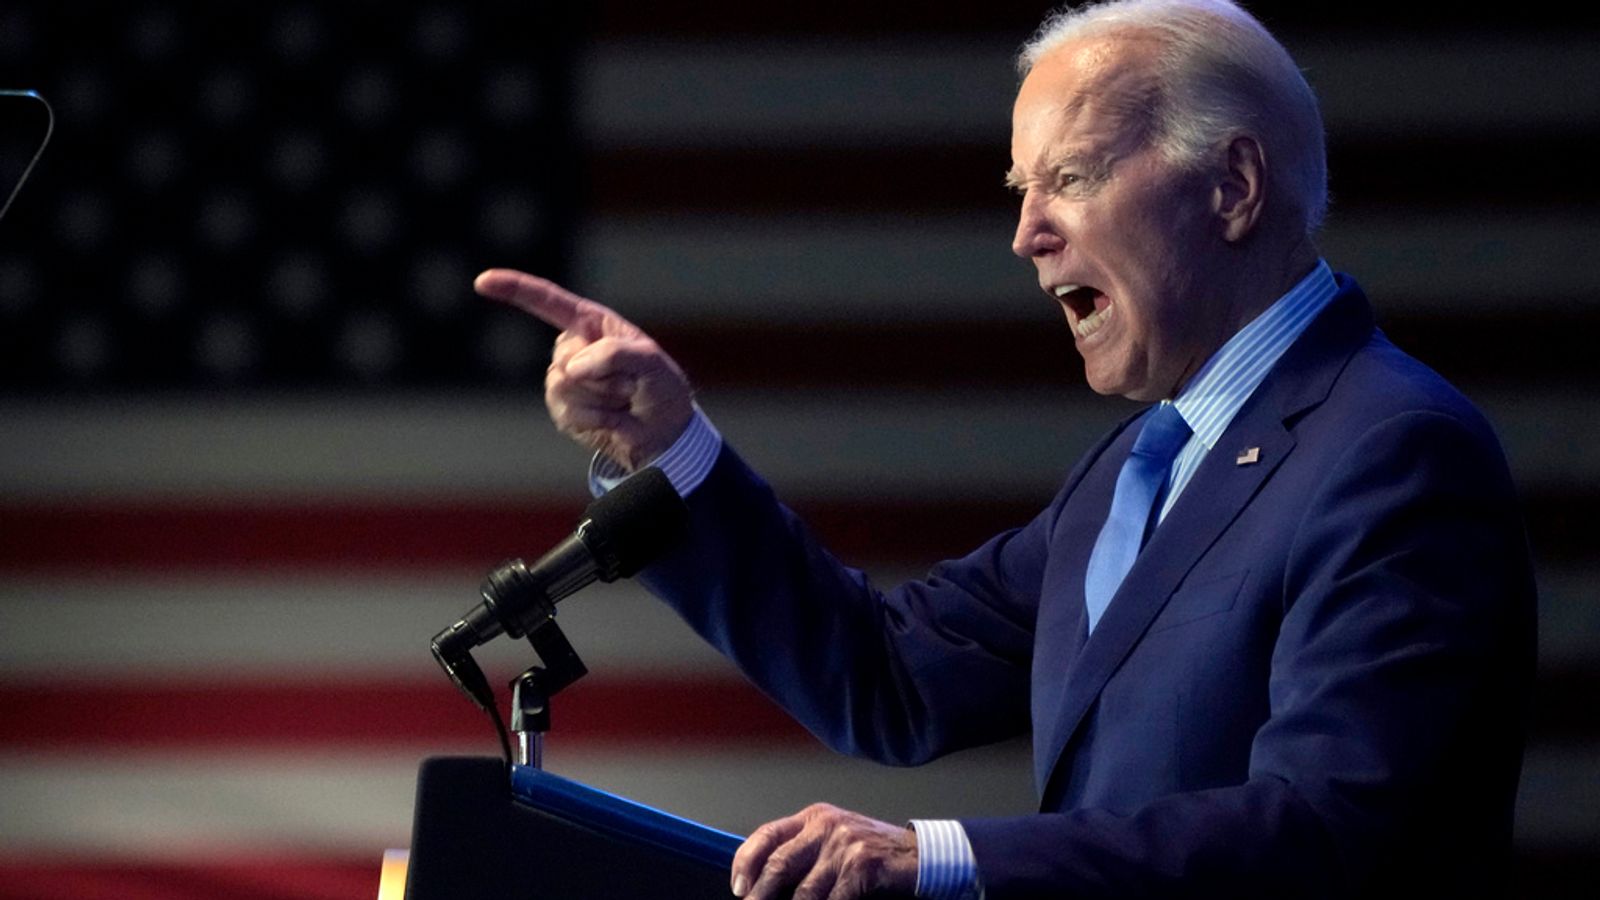 Biden faces pivotal moment as he weighs retaliation for soldier deaths in Jordan drone strike